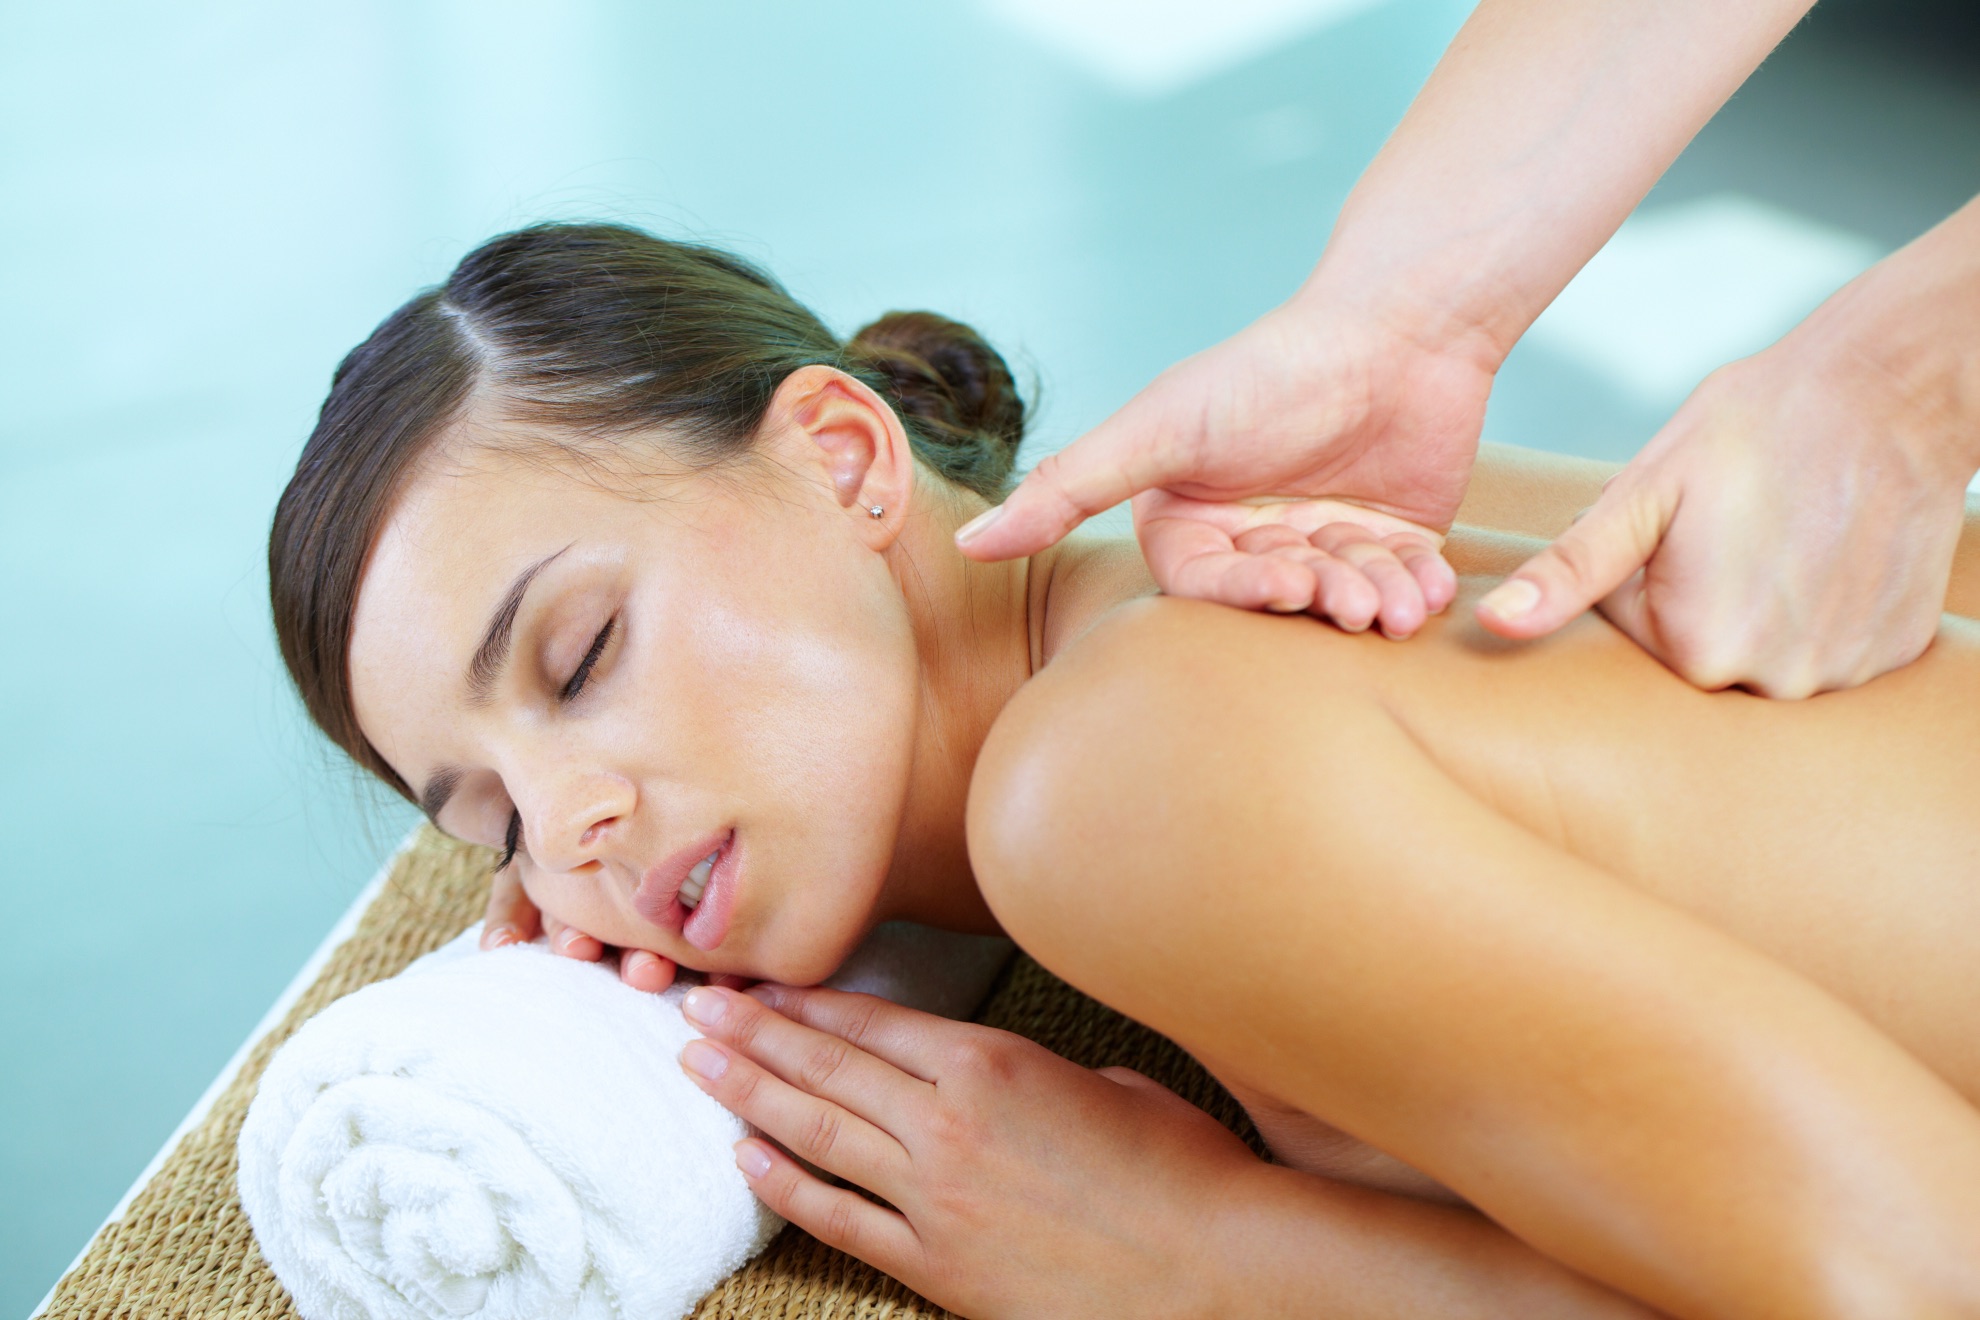 Woman Spends Entire Massage Assuming Therapist Is Judging Her Disgusting Body